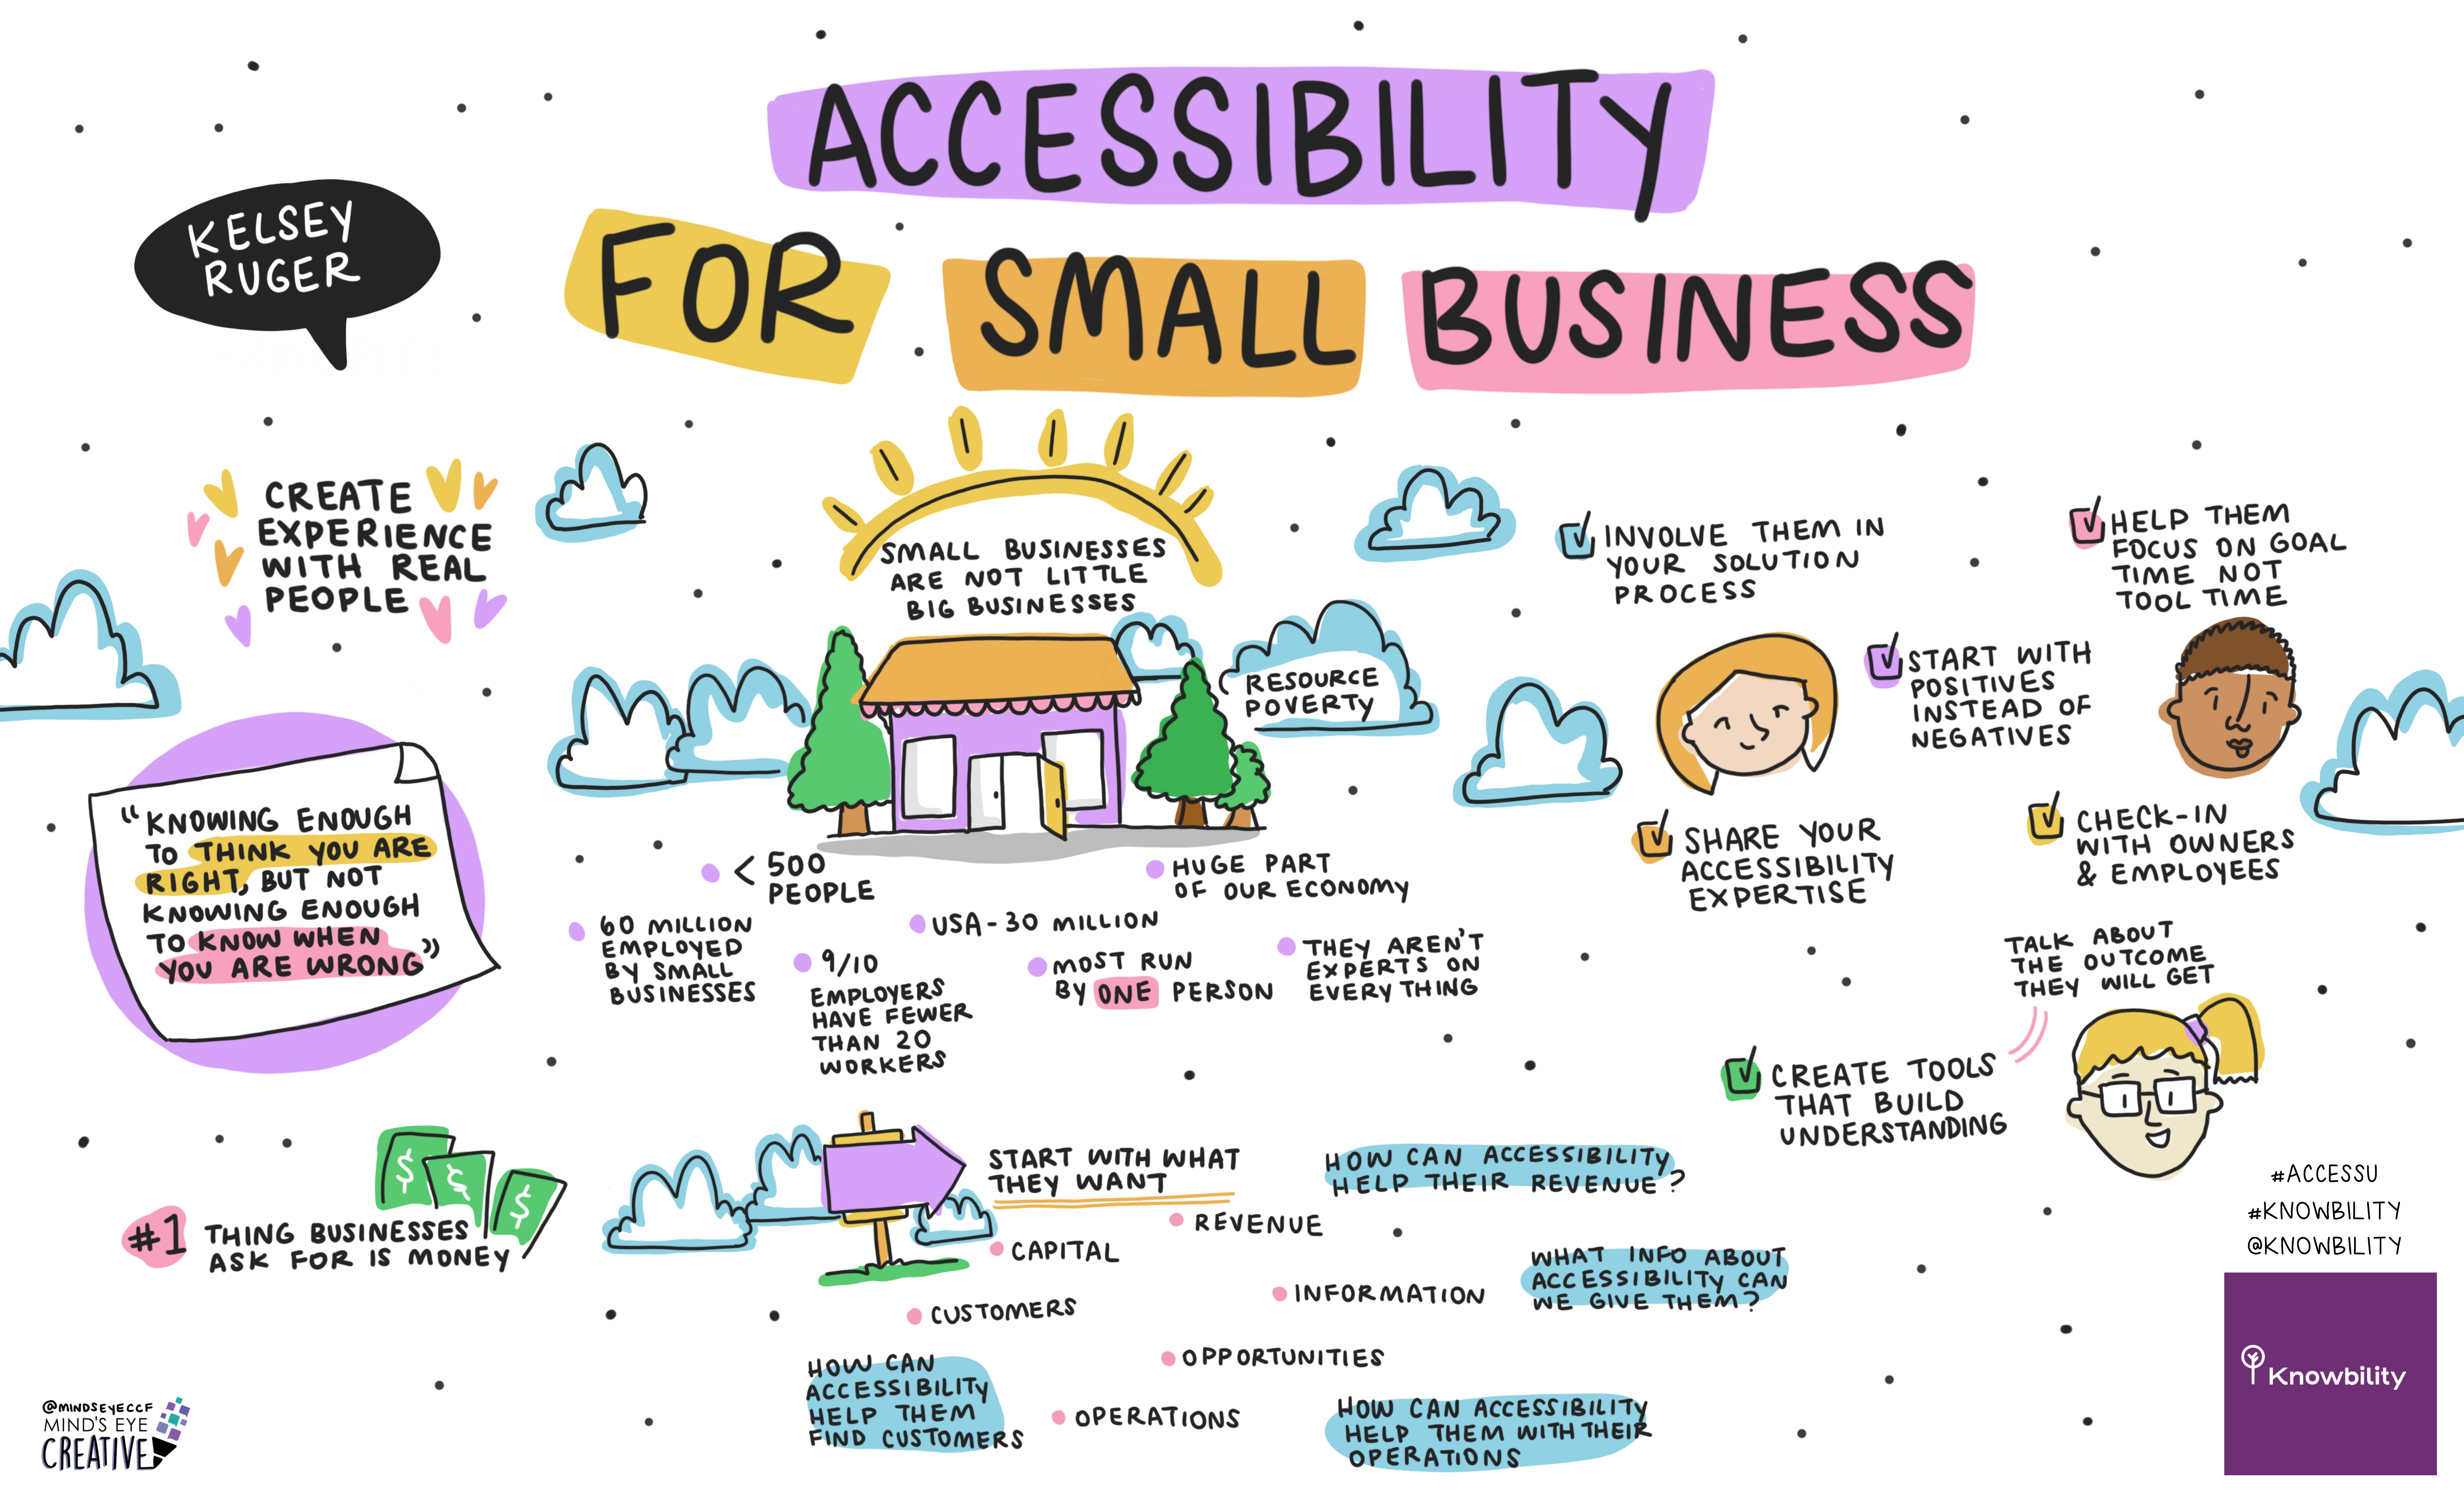 Sketchnote for the presentation titled, “Accessibility for Small Businesses” at the AccessU event.